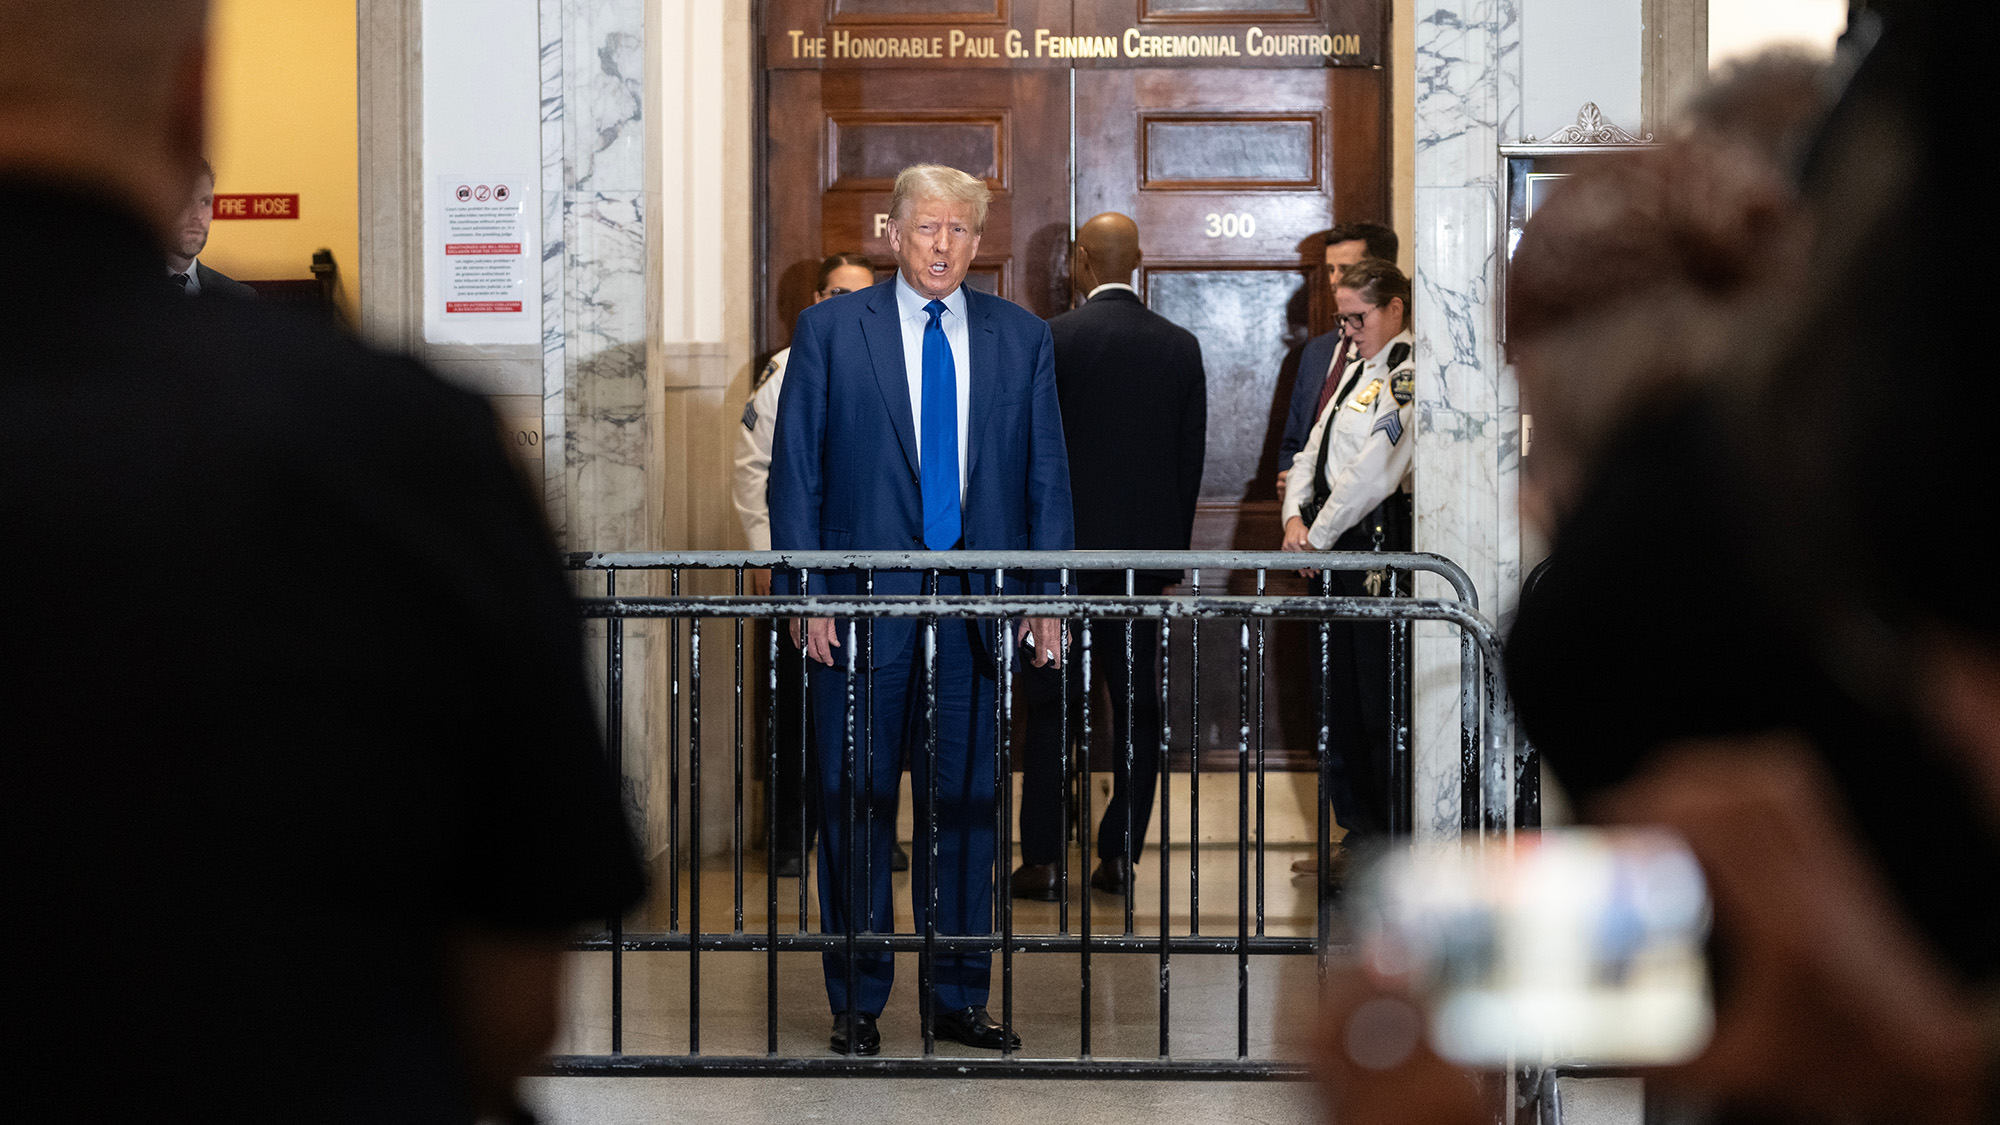 Donald Trump addressing the press outside a courtroom in New York.